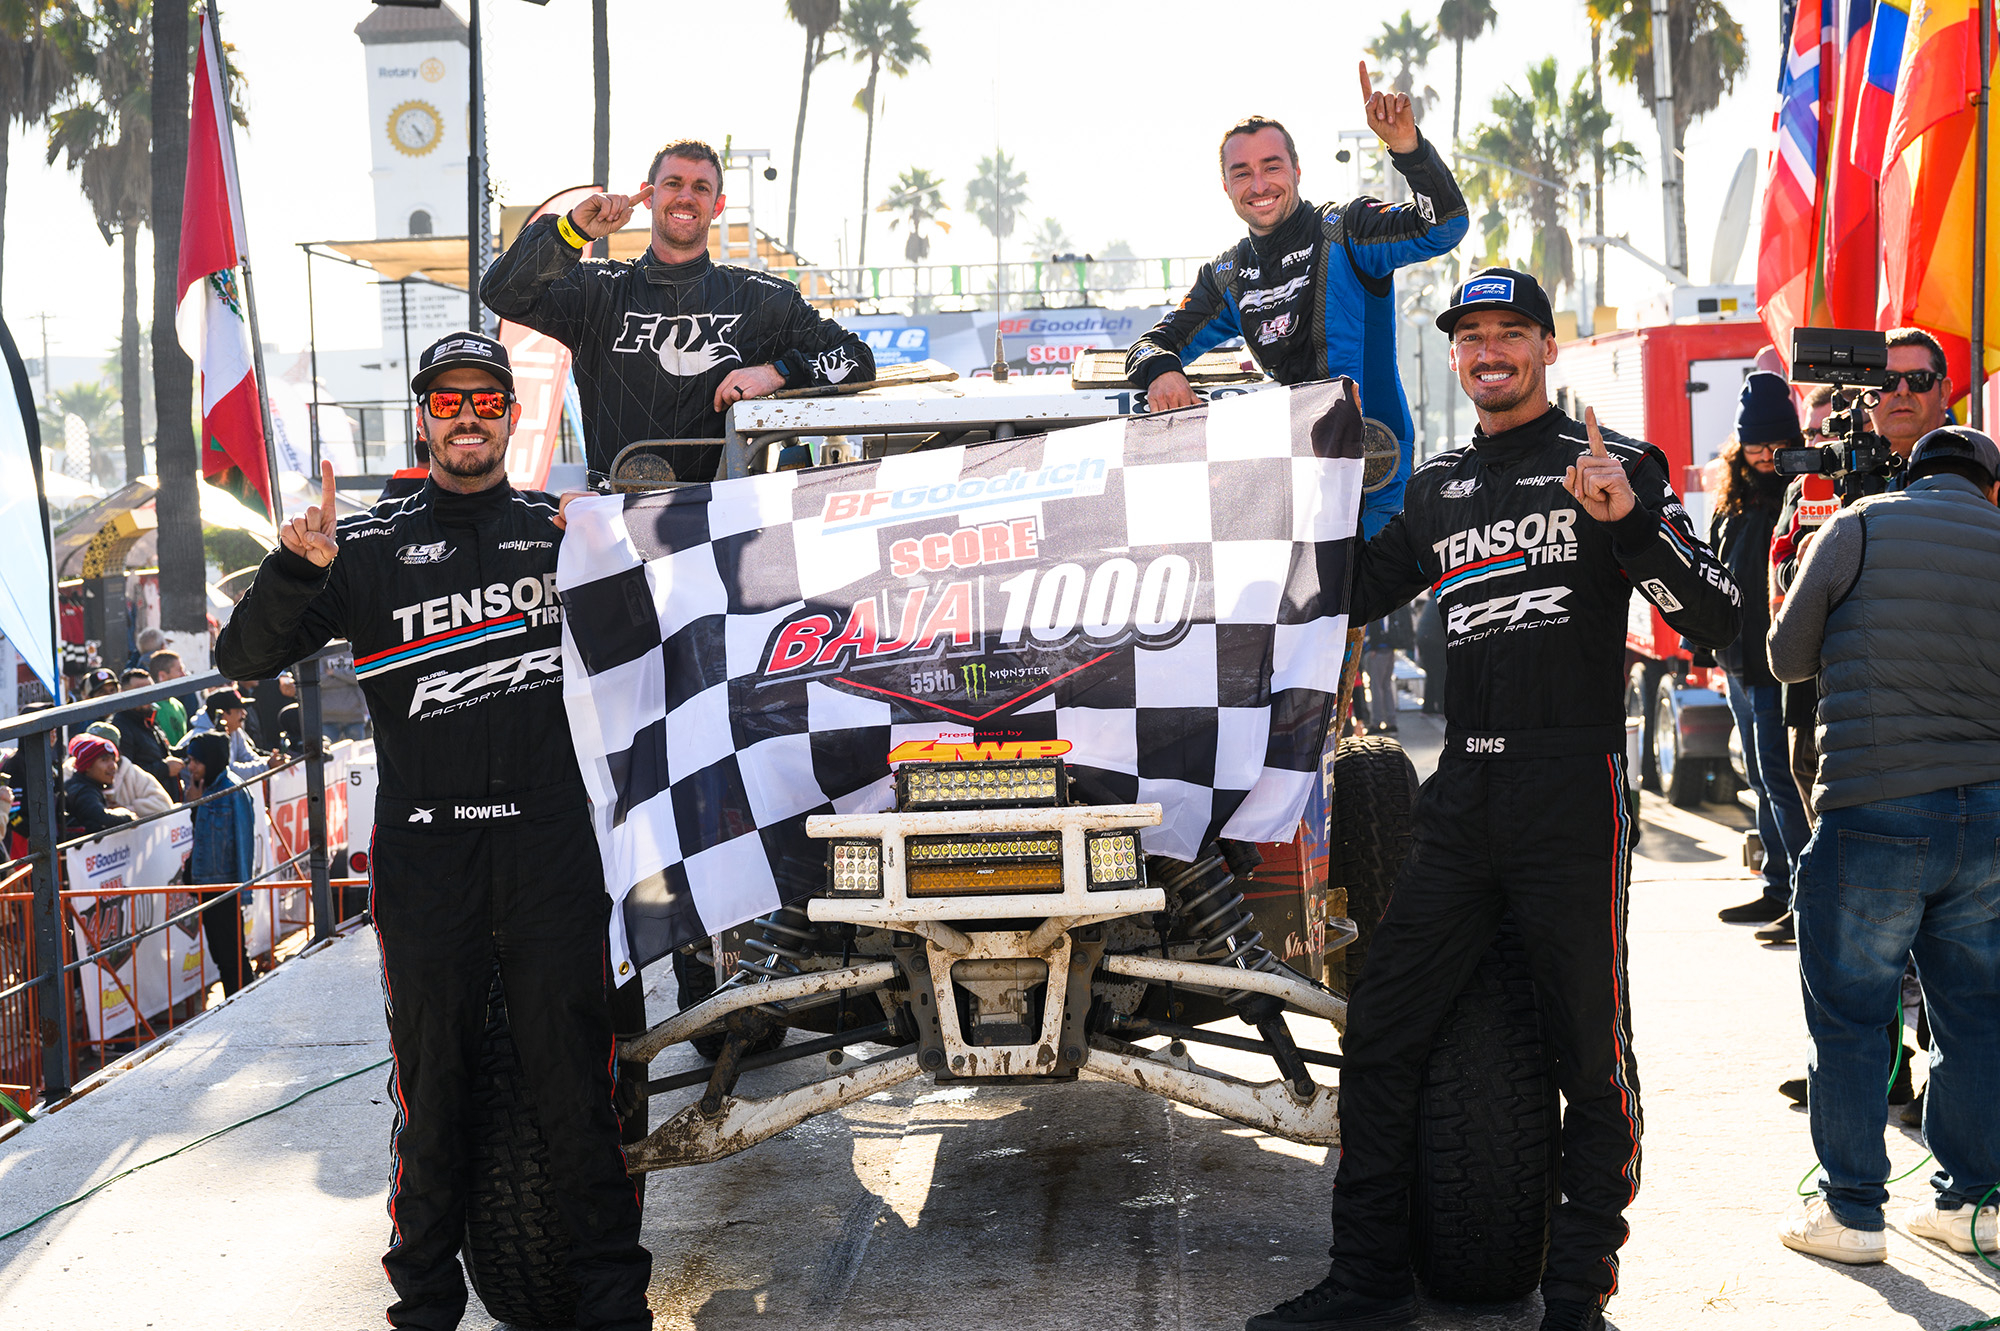 Polaris RZR Factory Racing's Branden Sims and co-driver Eric Borgen Celebrate their 2022 SCORE Baja 1000 victory